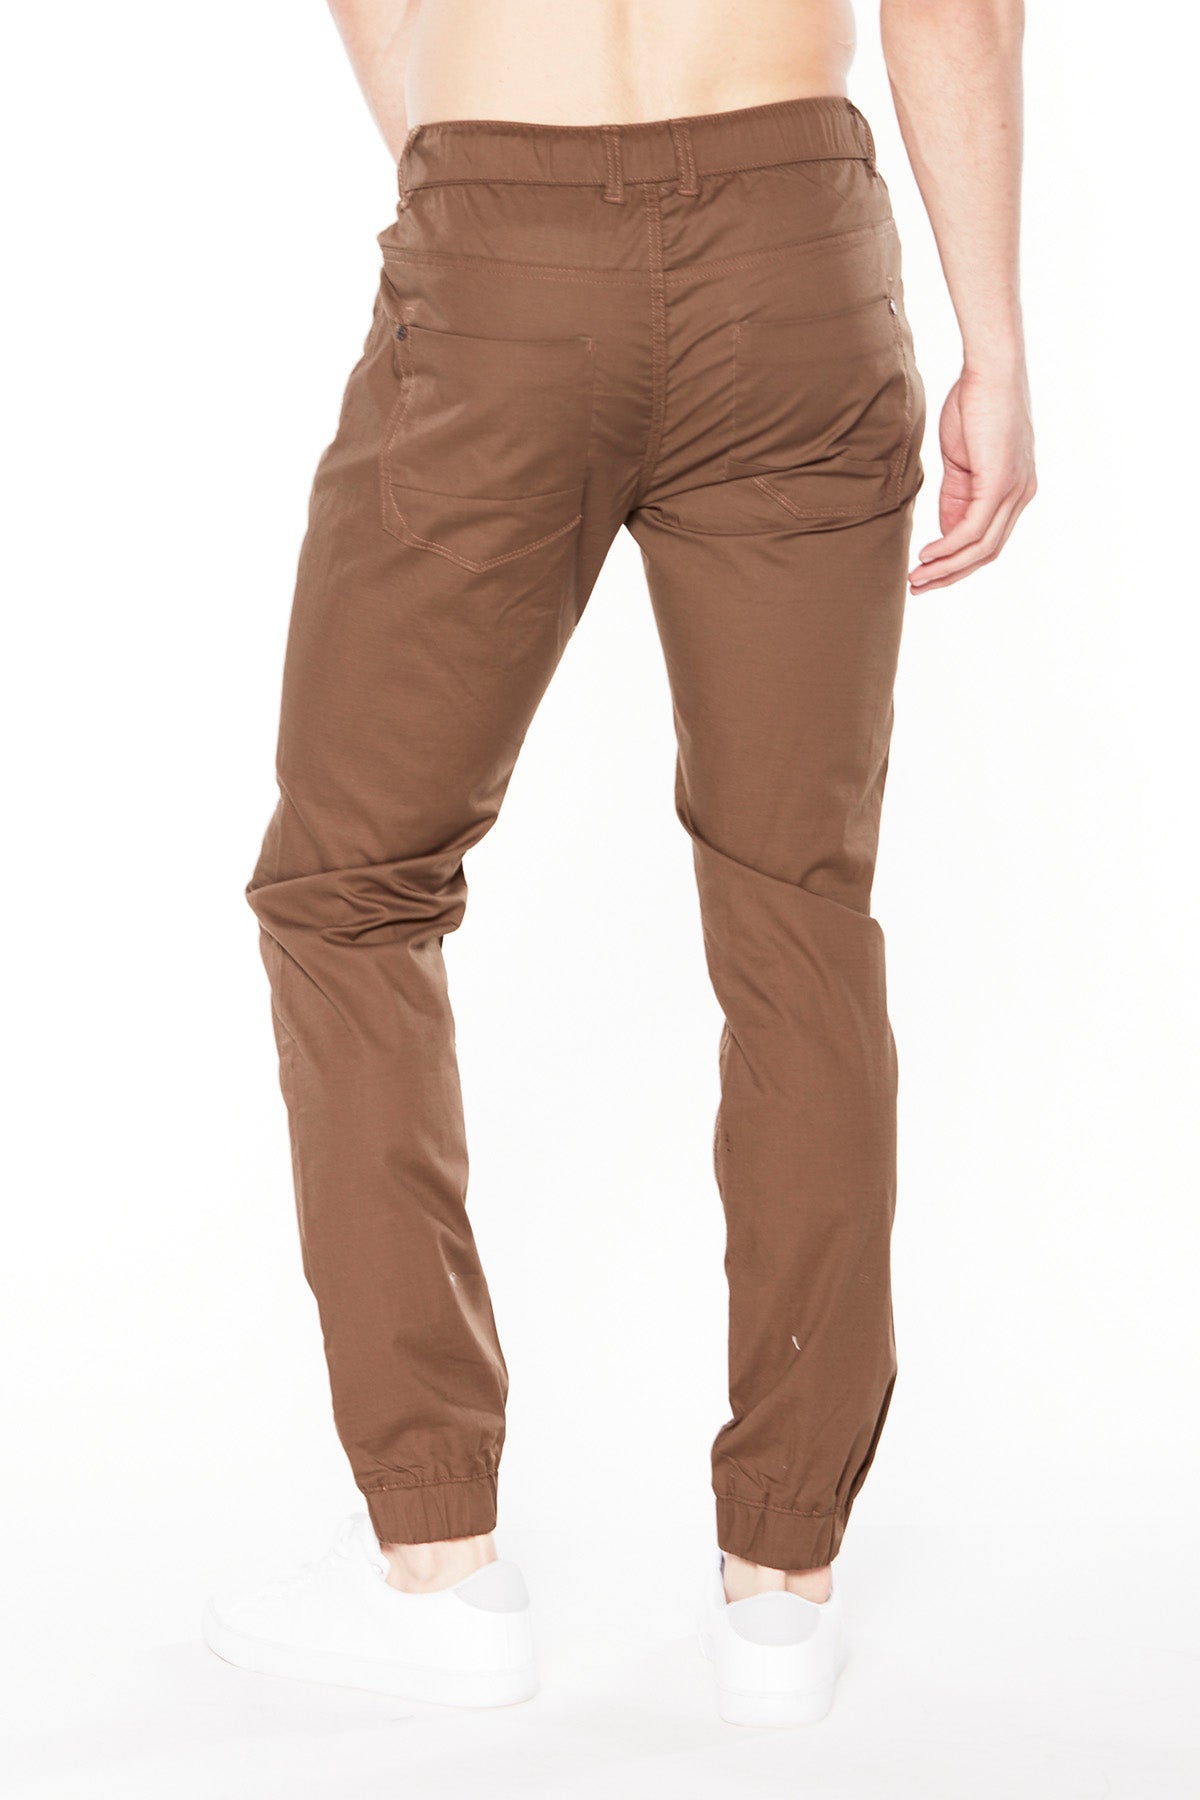 Chinos Pants Men Slim Fit Mens Autumn And Winter Solid Color Mid Waist  Solid | eBay